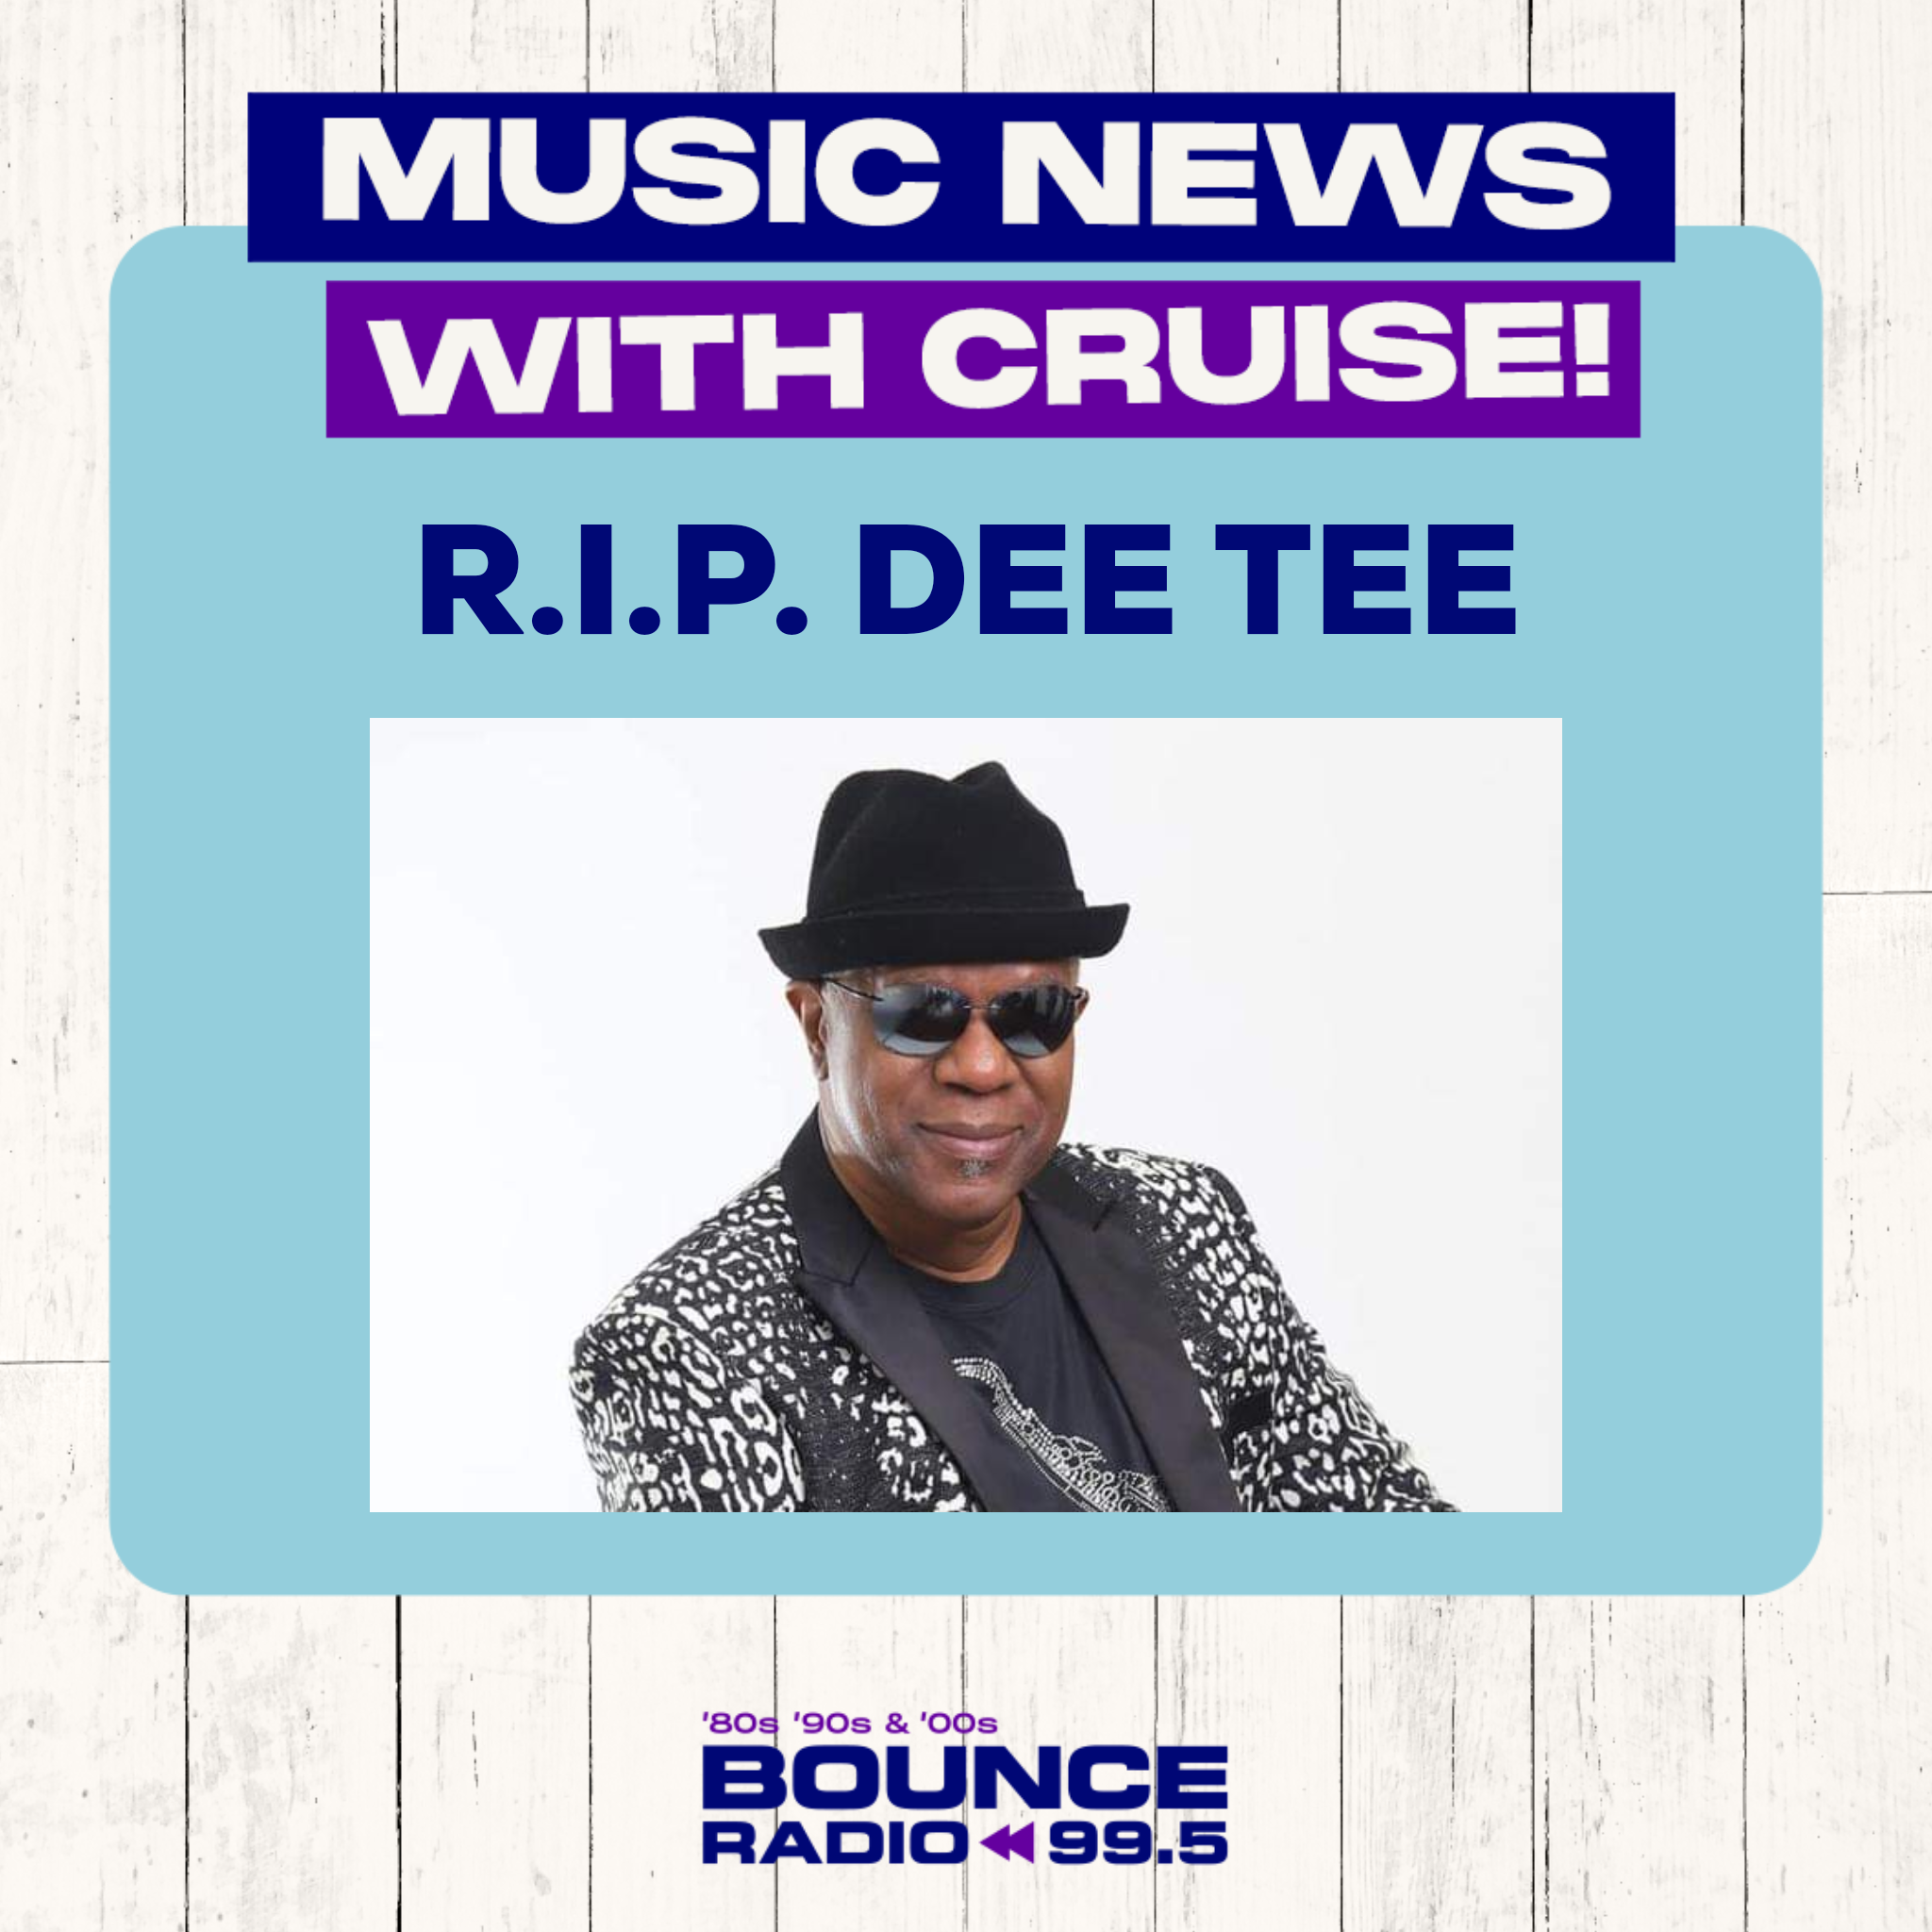 Music News with Cruise - Monday August 9th